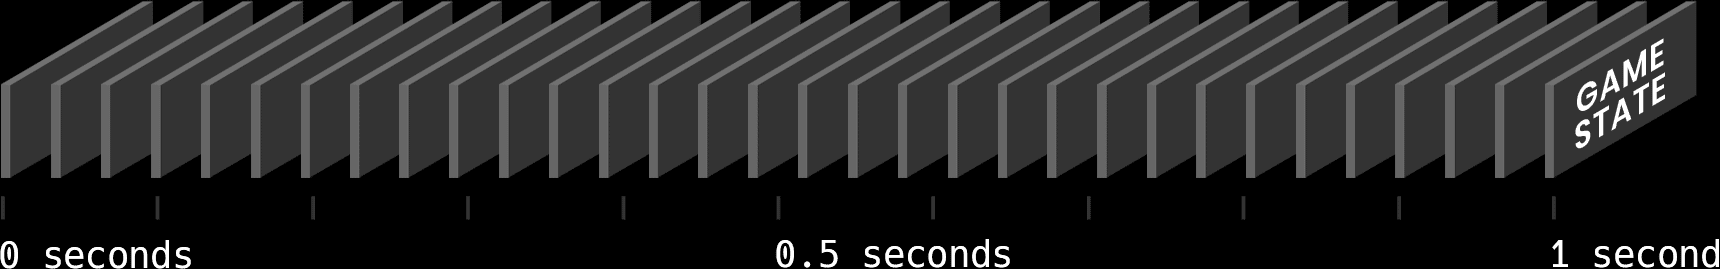 An isometric timeline covering 1 second, with 32 separate game states being transmitted from a game server - this represents a 32-tick game server